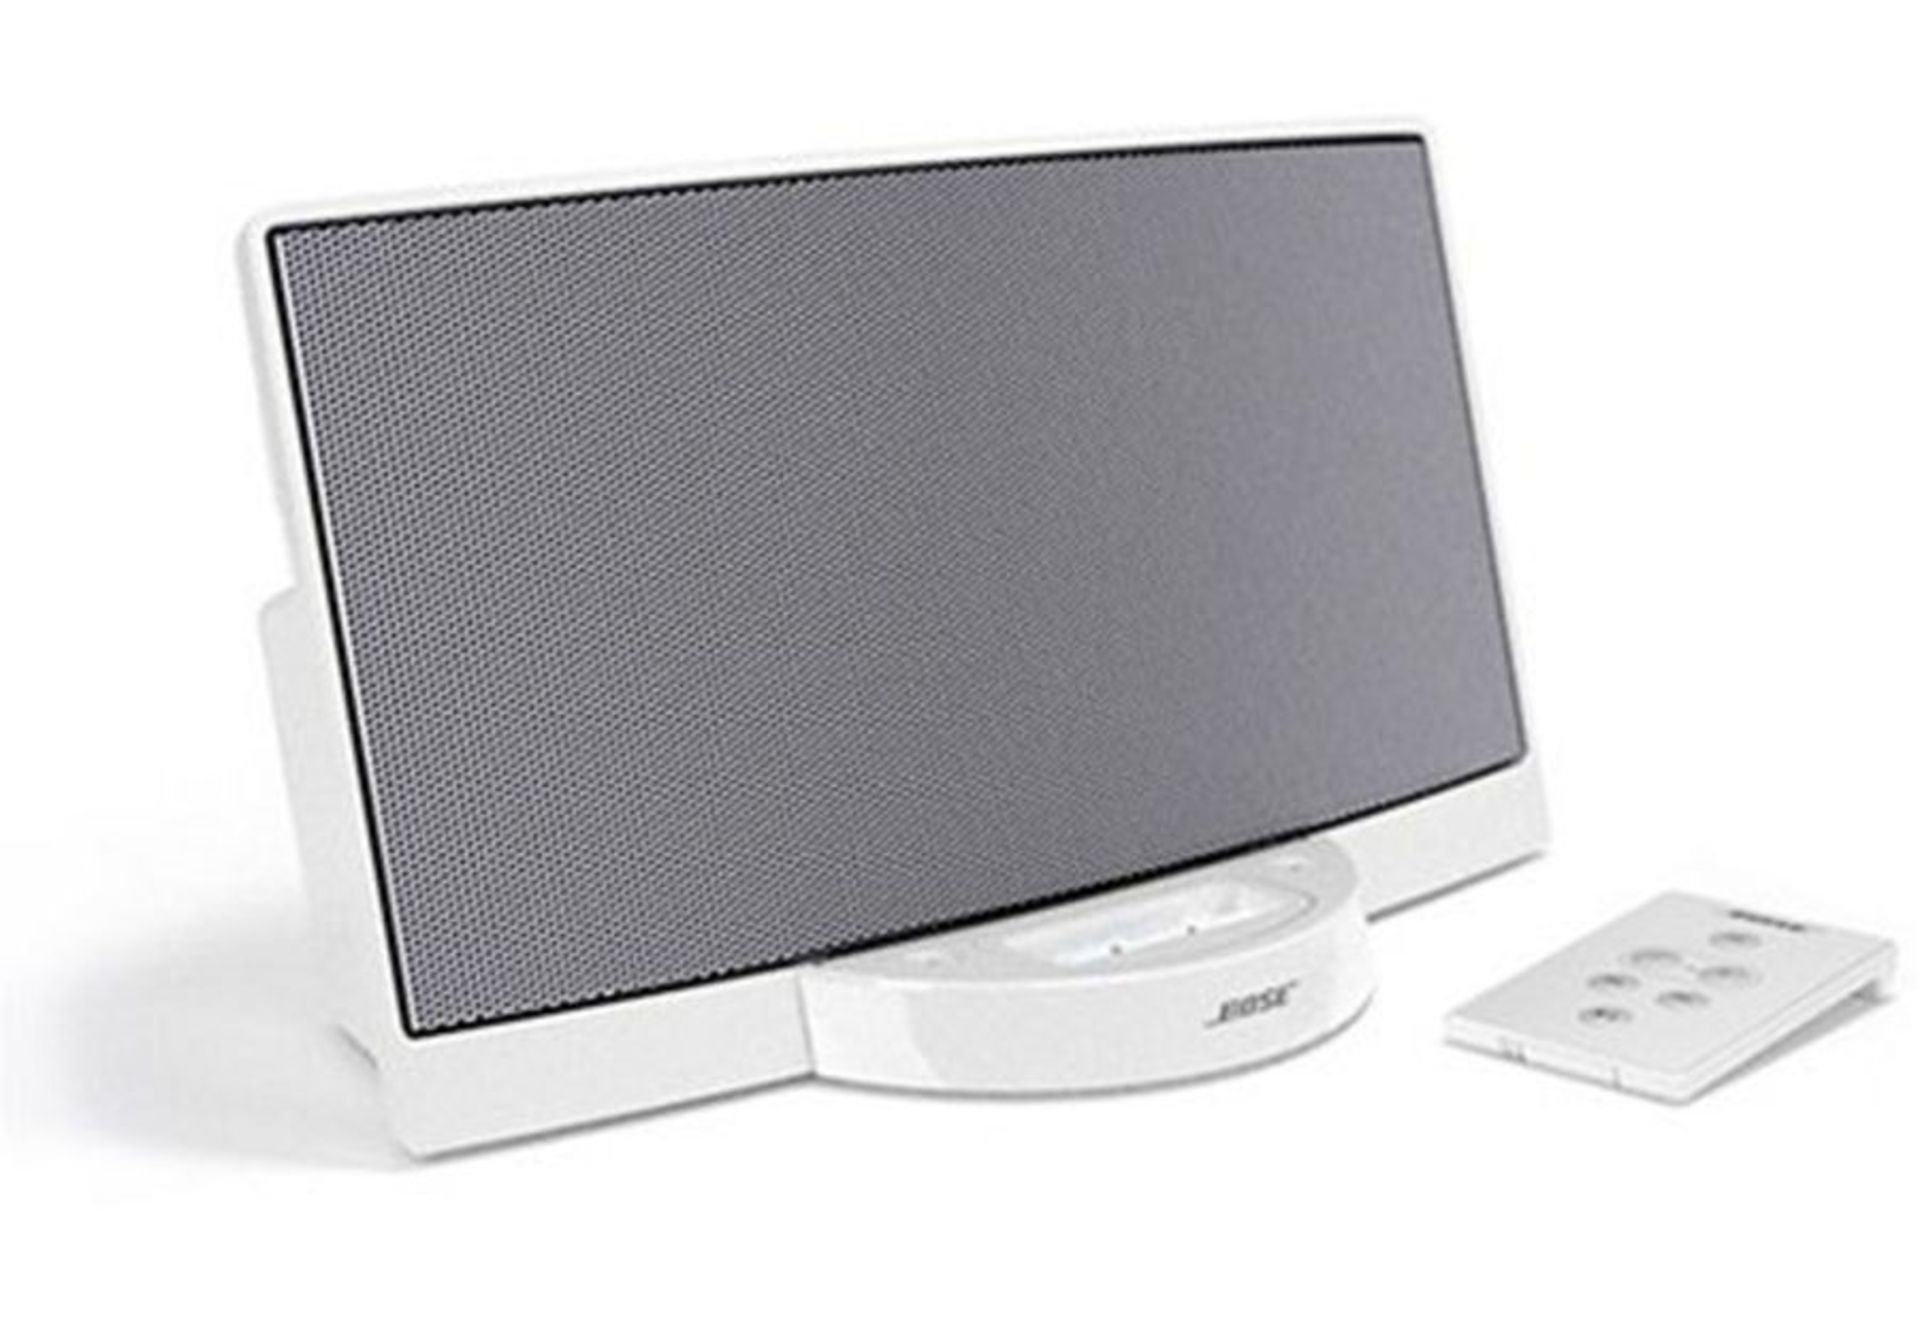 RRP £85.00 Bose SoundDock Digital Music System - Portable speakers with digital player dock for i - Image 3 of 4